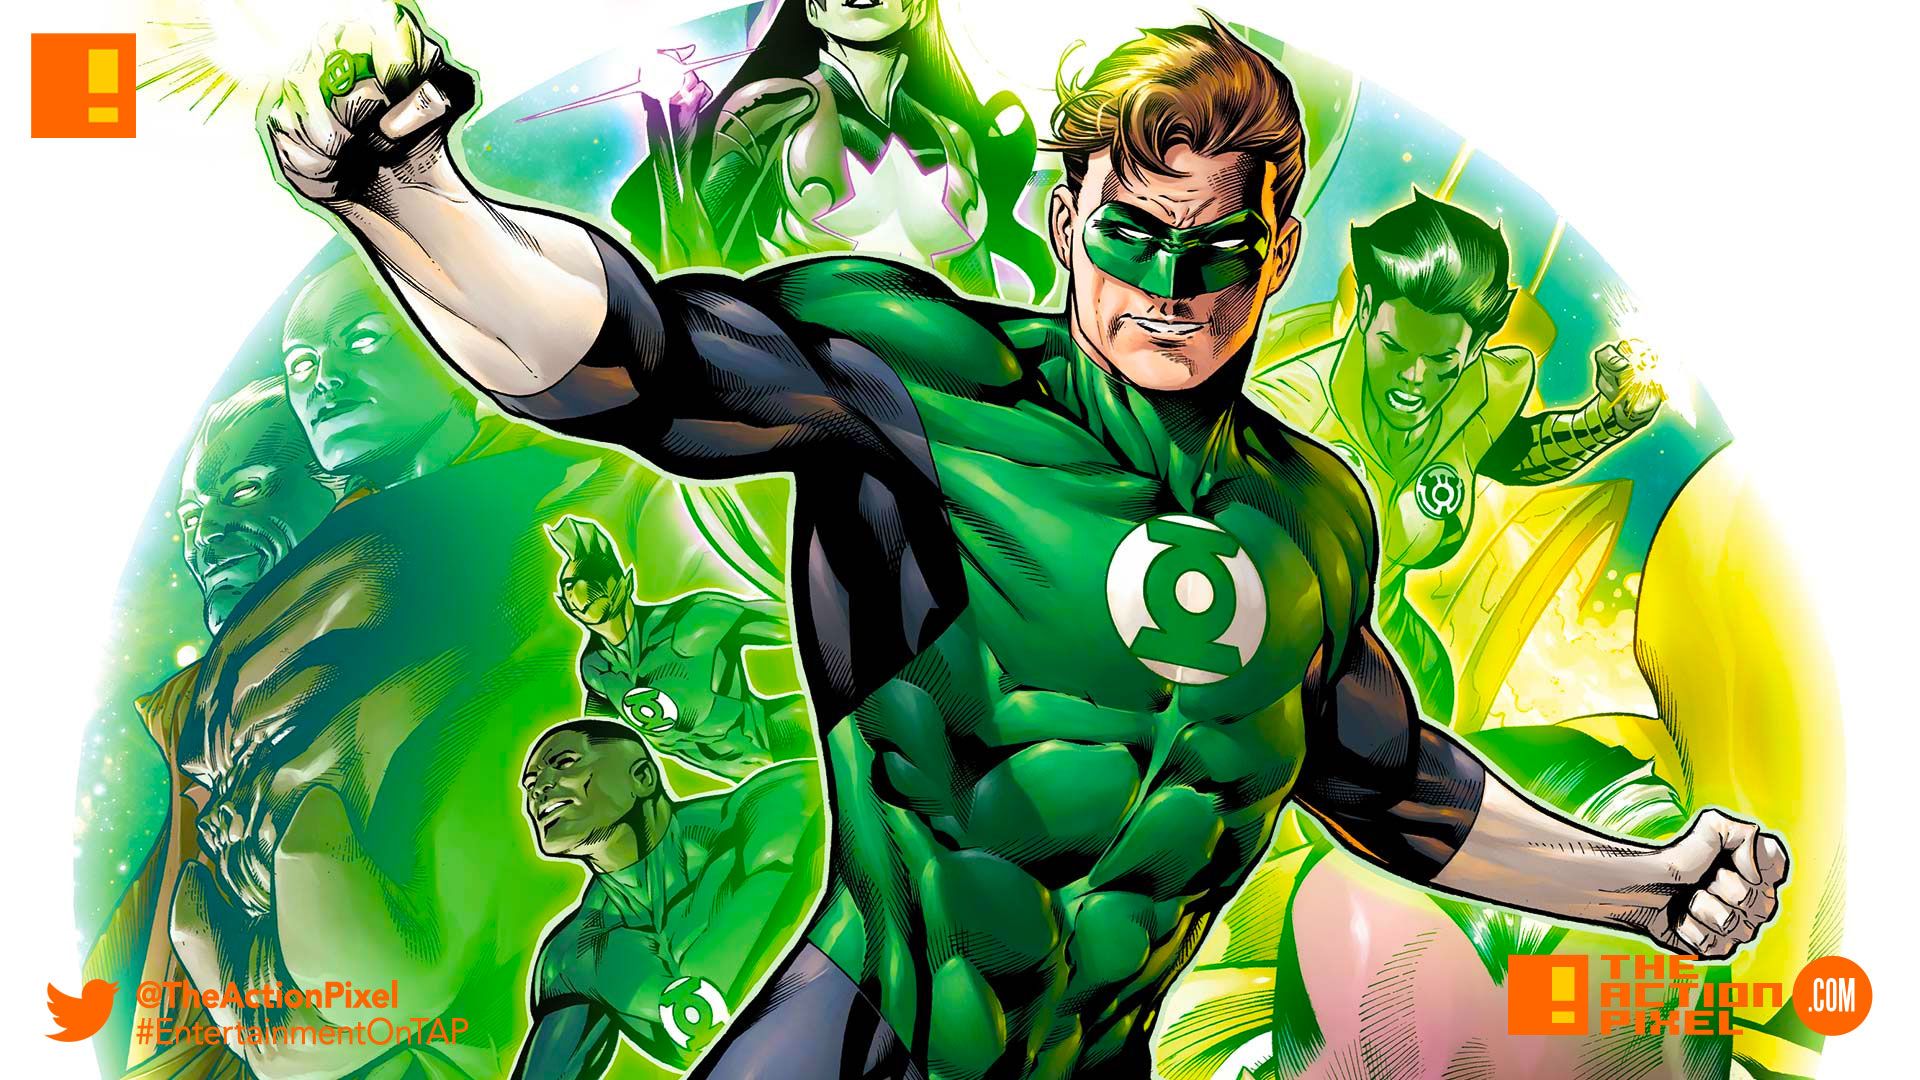 TAPQuotes. The Green Lantern Oath is no ordinary mantra